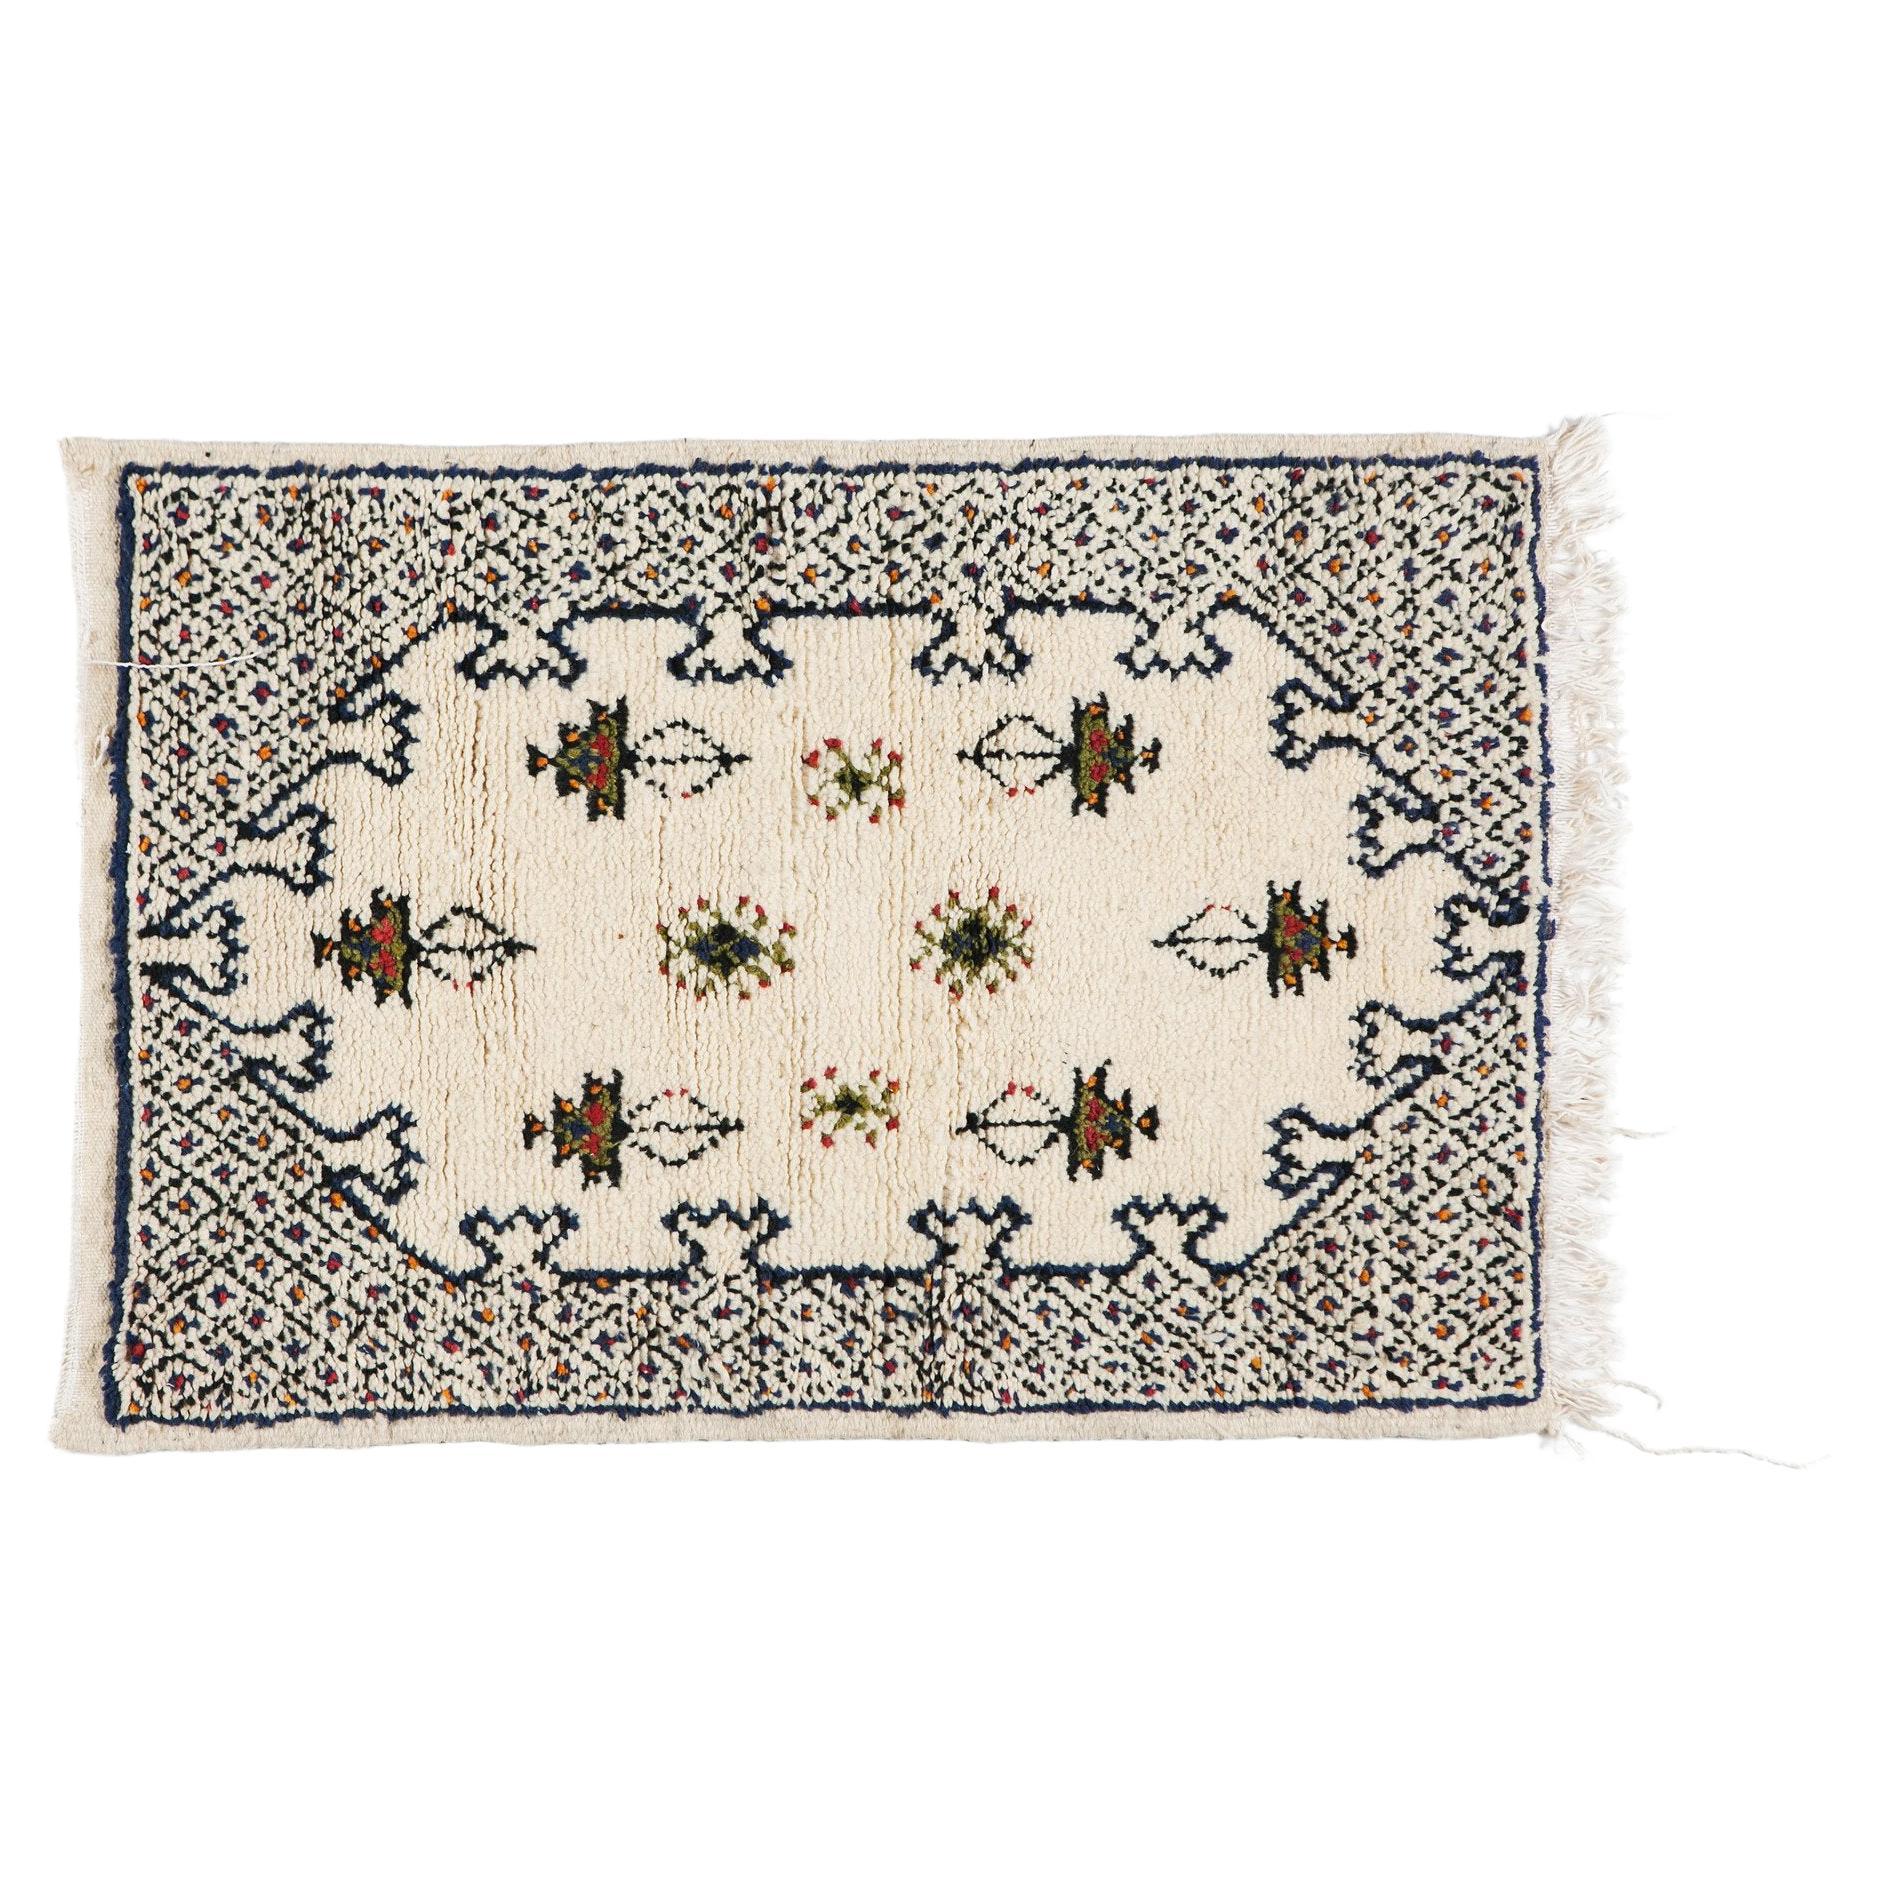 Vintage Boho Chic Tribal Moroccan Small White Wool Hand-Woven Rug or Carpet  For Sale